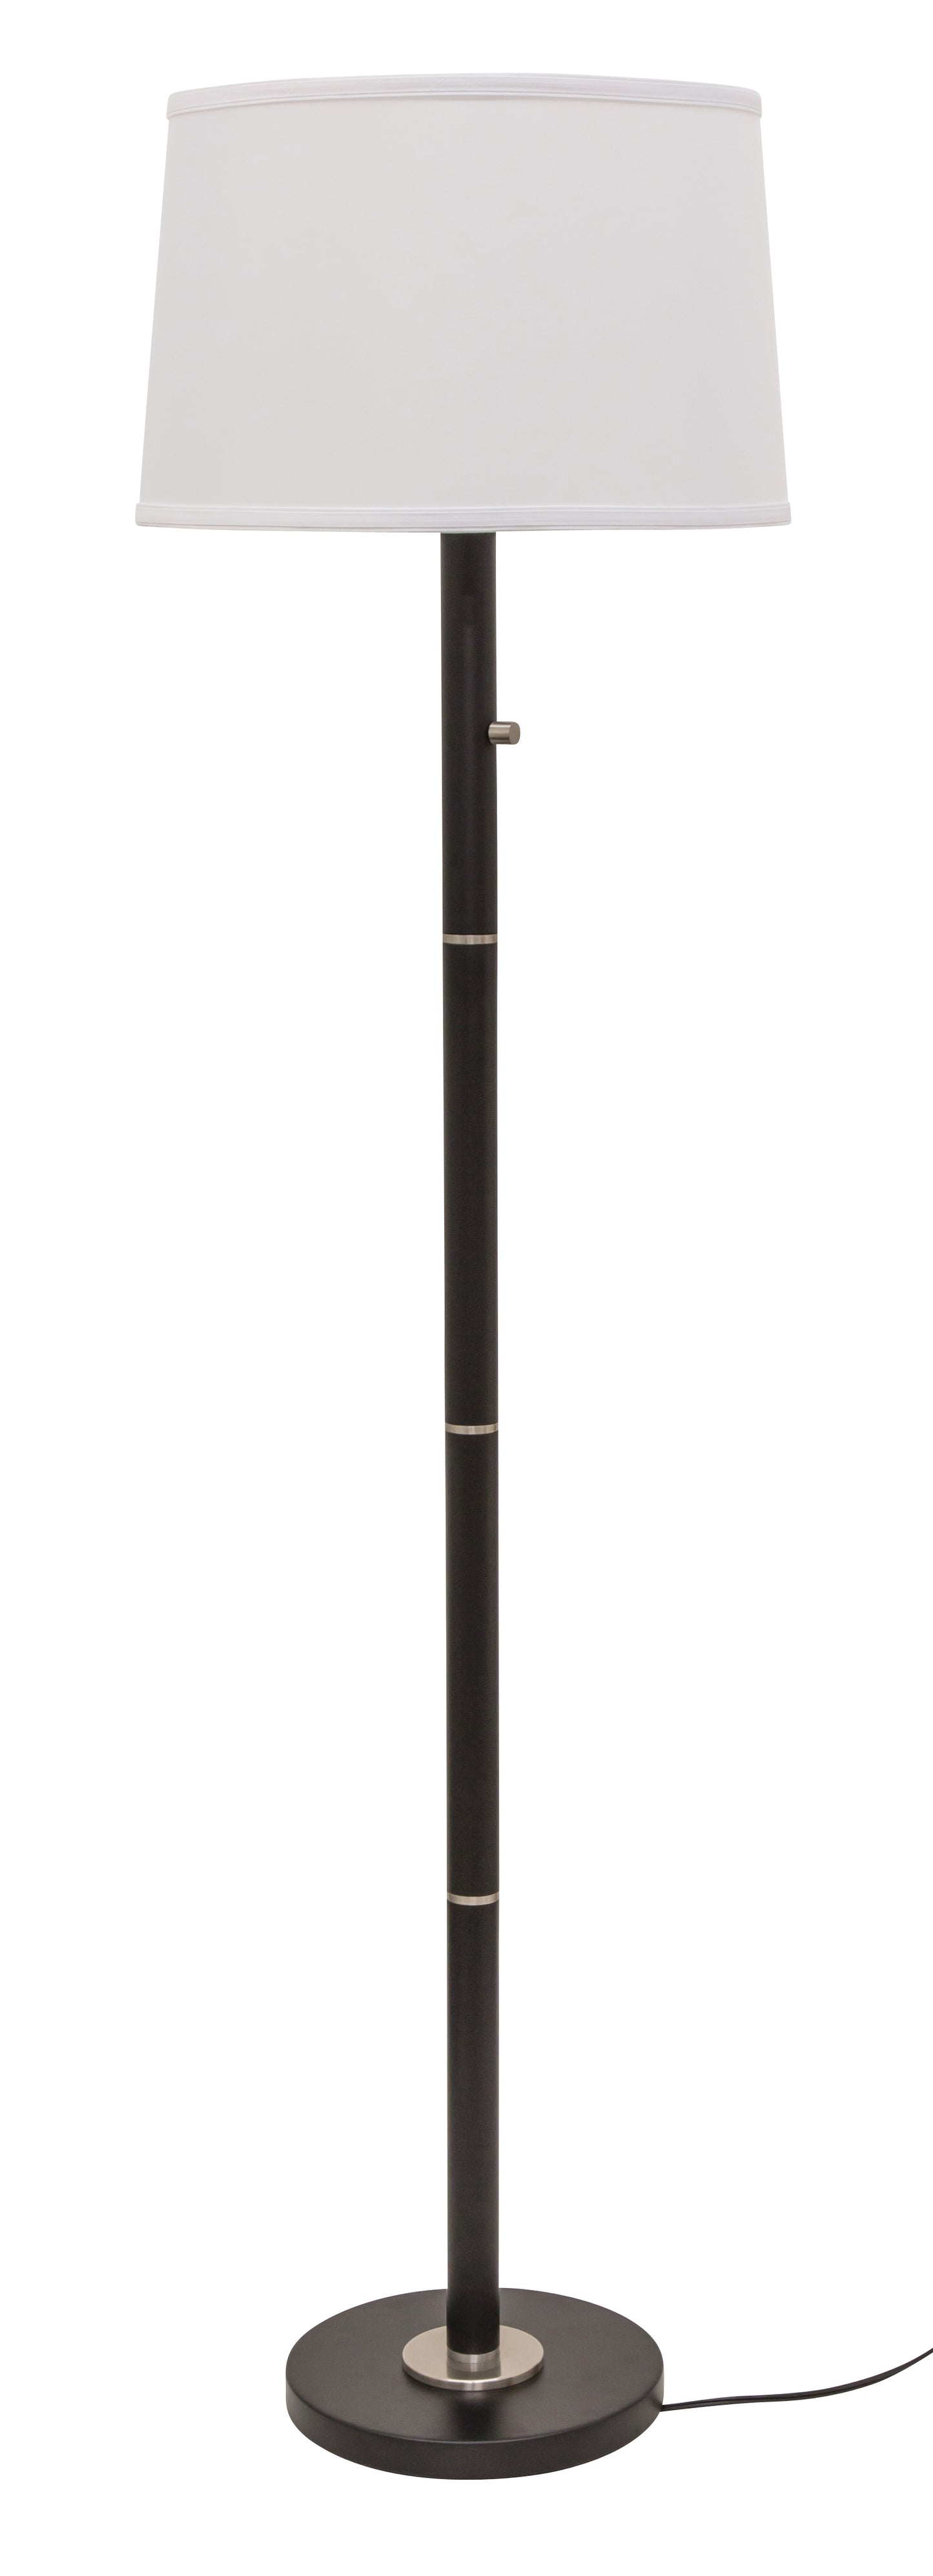 House of Troy Rupert three way floor lamp in black with satin nickel accents RU703-BLK